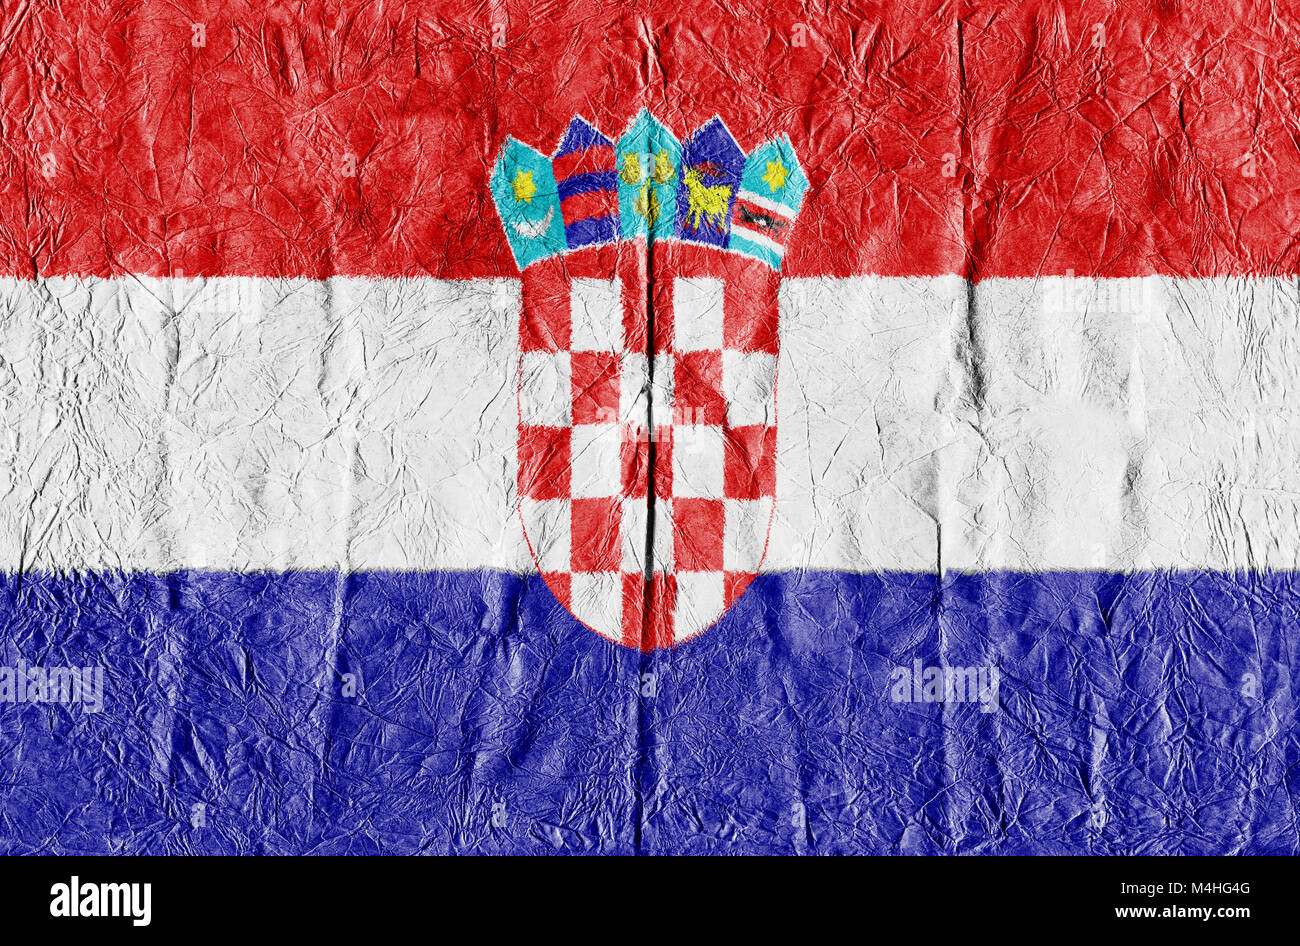 Croatia flag on a paper in close-up Stock Photo